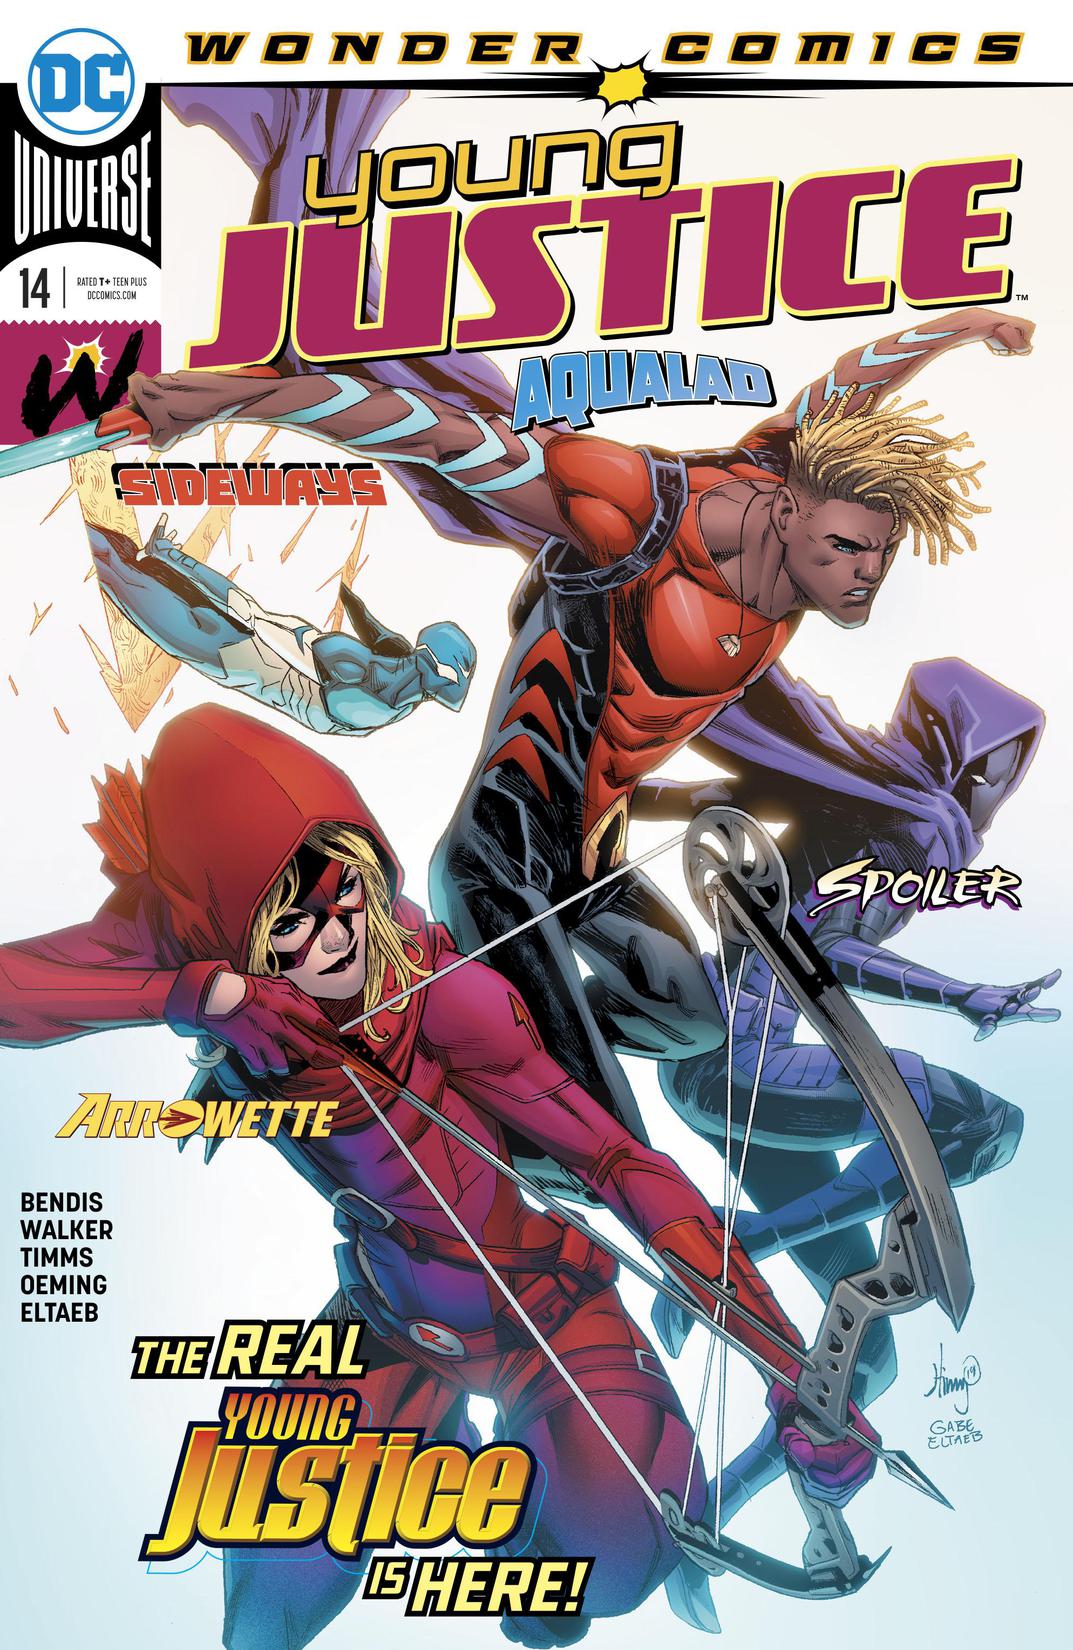 Young Justice (2019-) #14 preview images